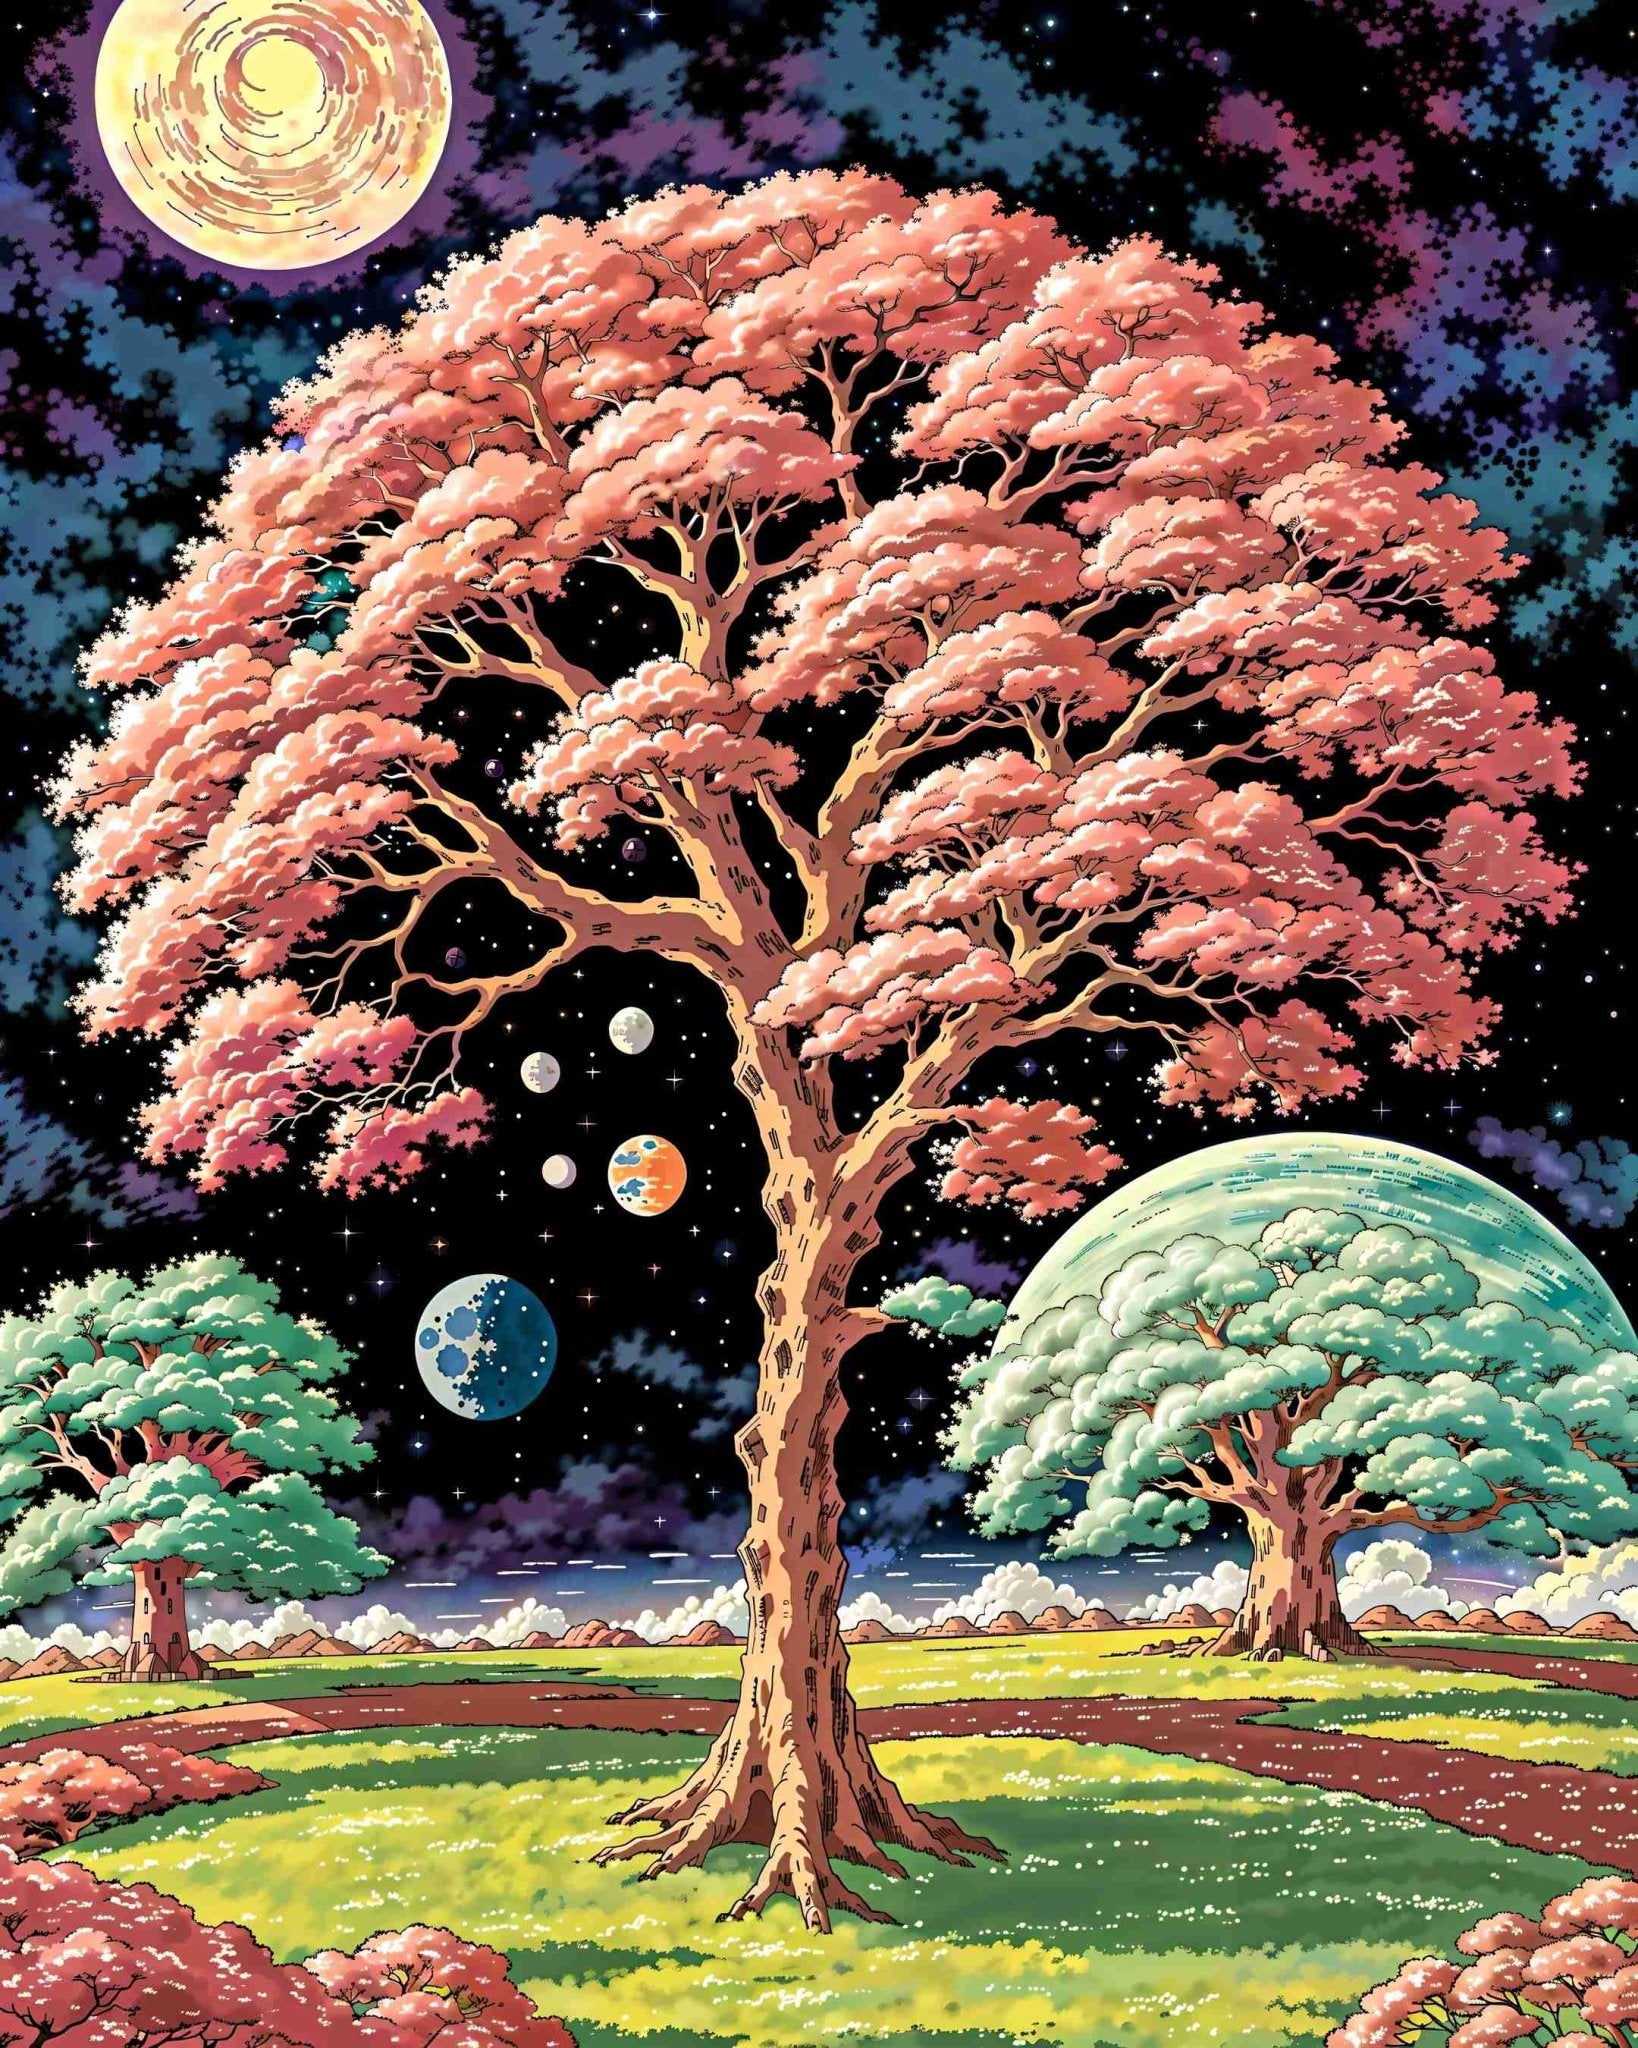 The world of world trees - Poster - Ever colorful